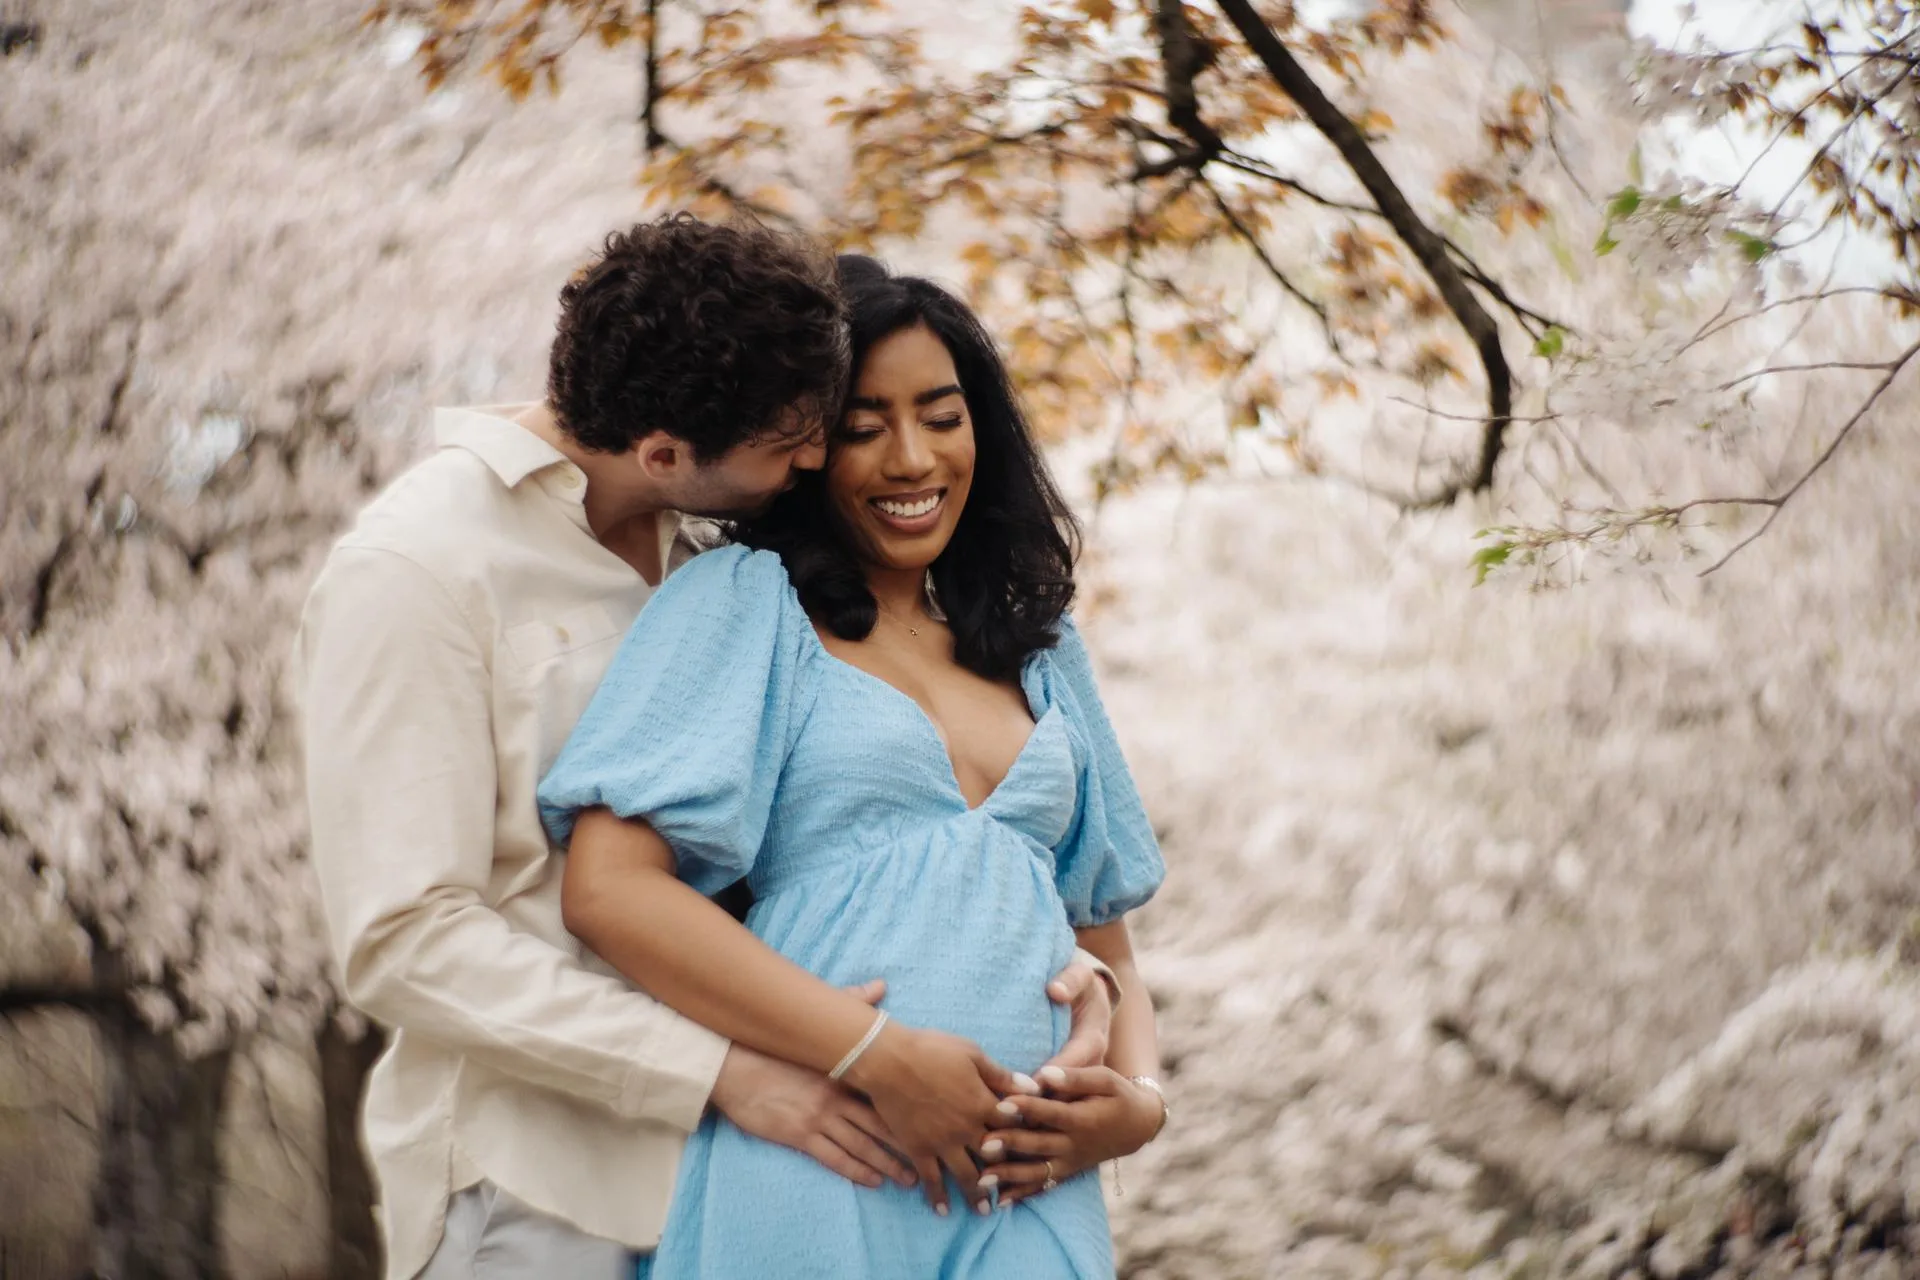 A Cherry Blossom Maternity Shoot in Central Park